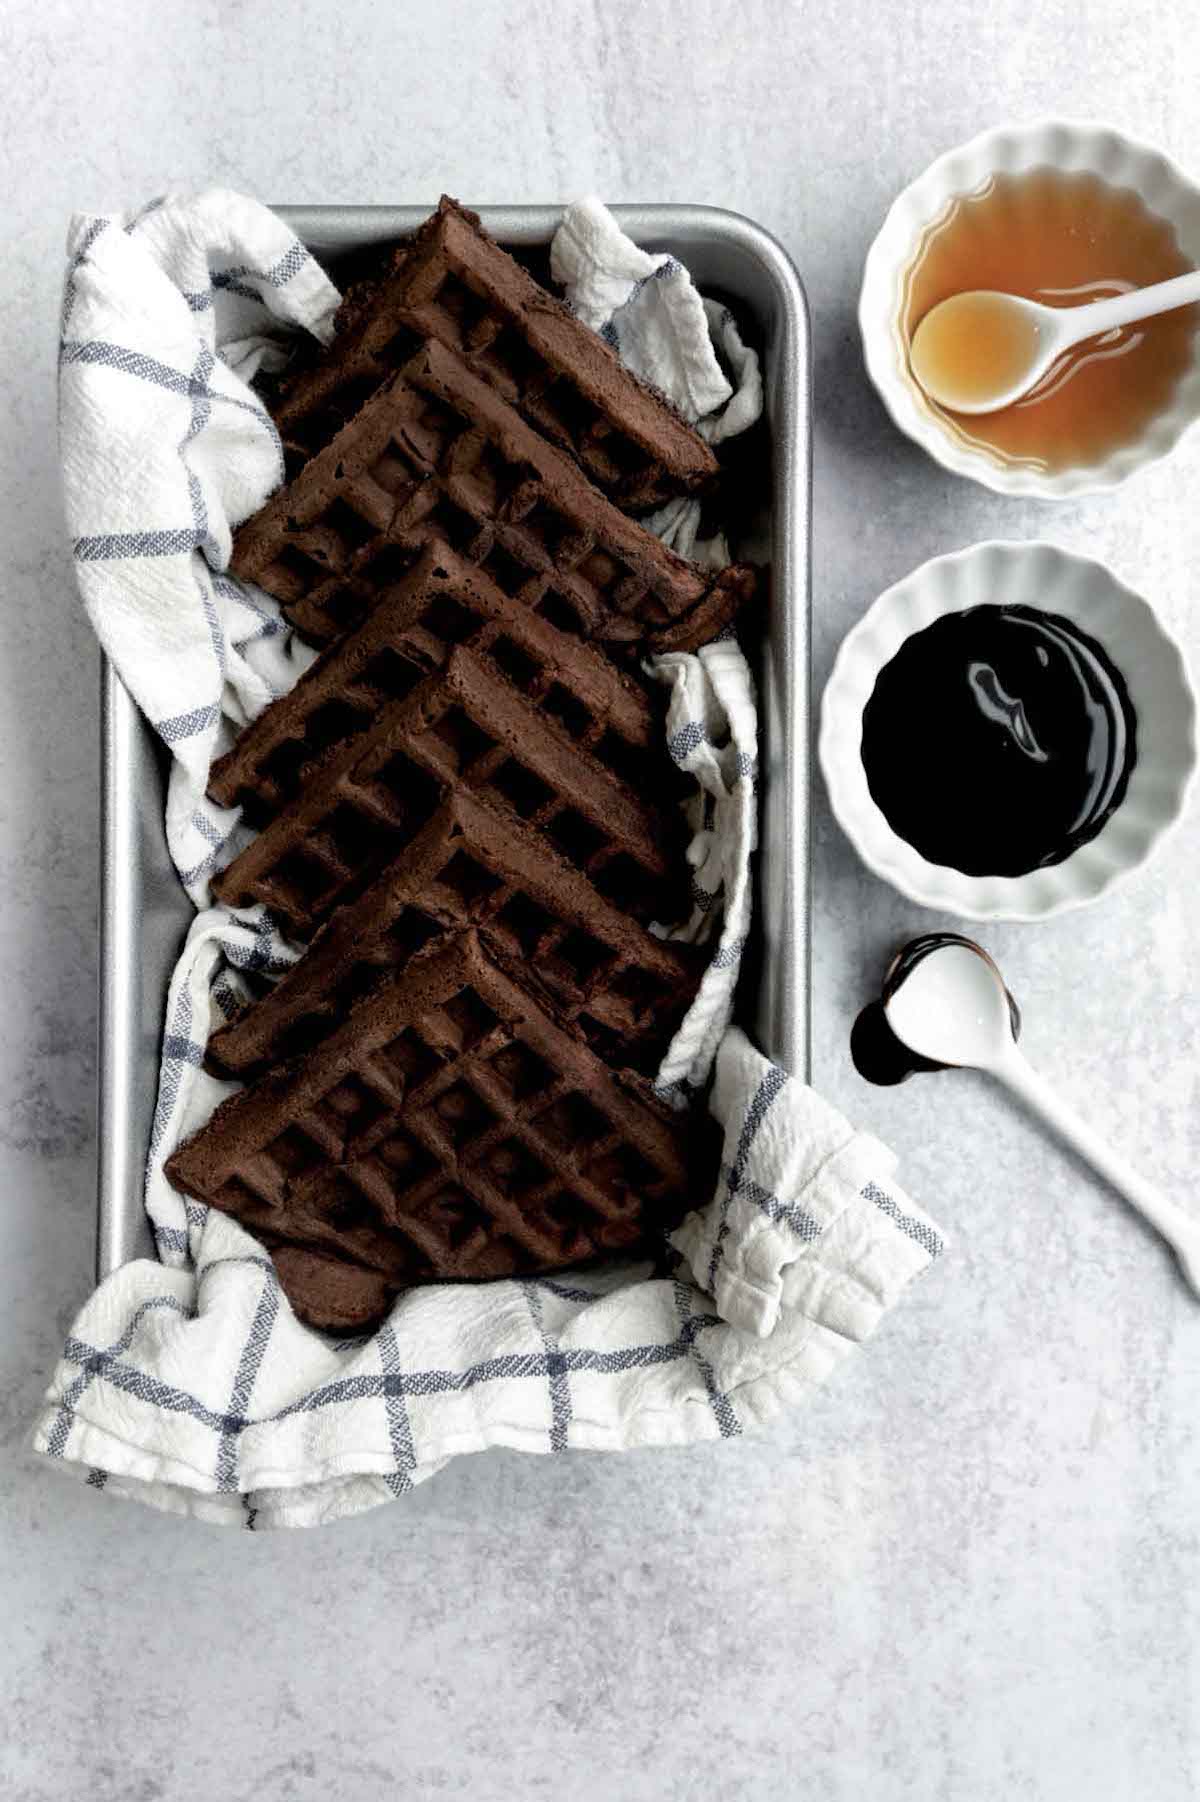 Six square Chocolate Waffles sit in a baking tray next to ramekins of fudge and caramel.